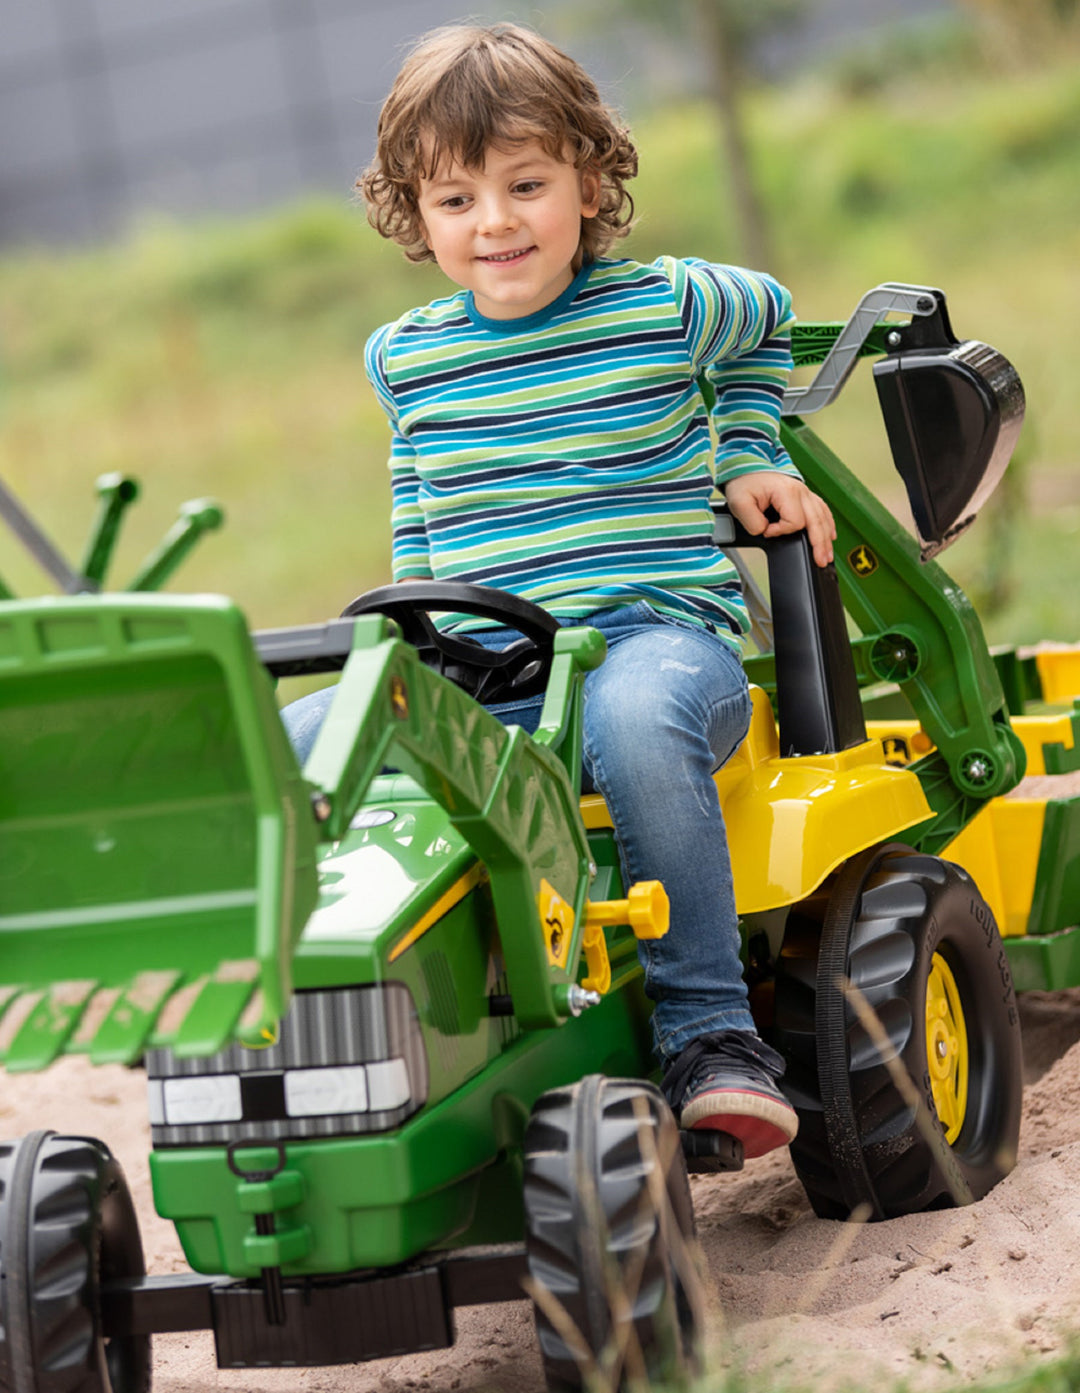 John Deere Backhoe Loader Tractor is a tough pedal tractor with a smooth finish. It comes complete with front loader and backhoe that can be raised and lowered, scooped and tipped using the levers. The oversized resin tires have long lasting rubber tread strip.